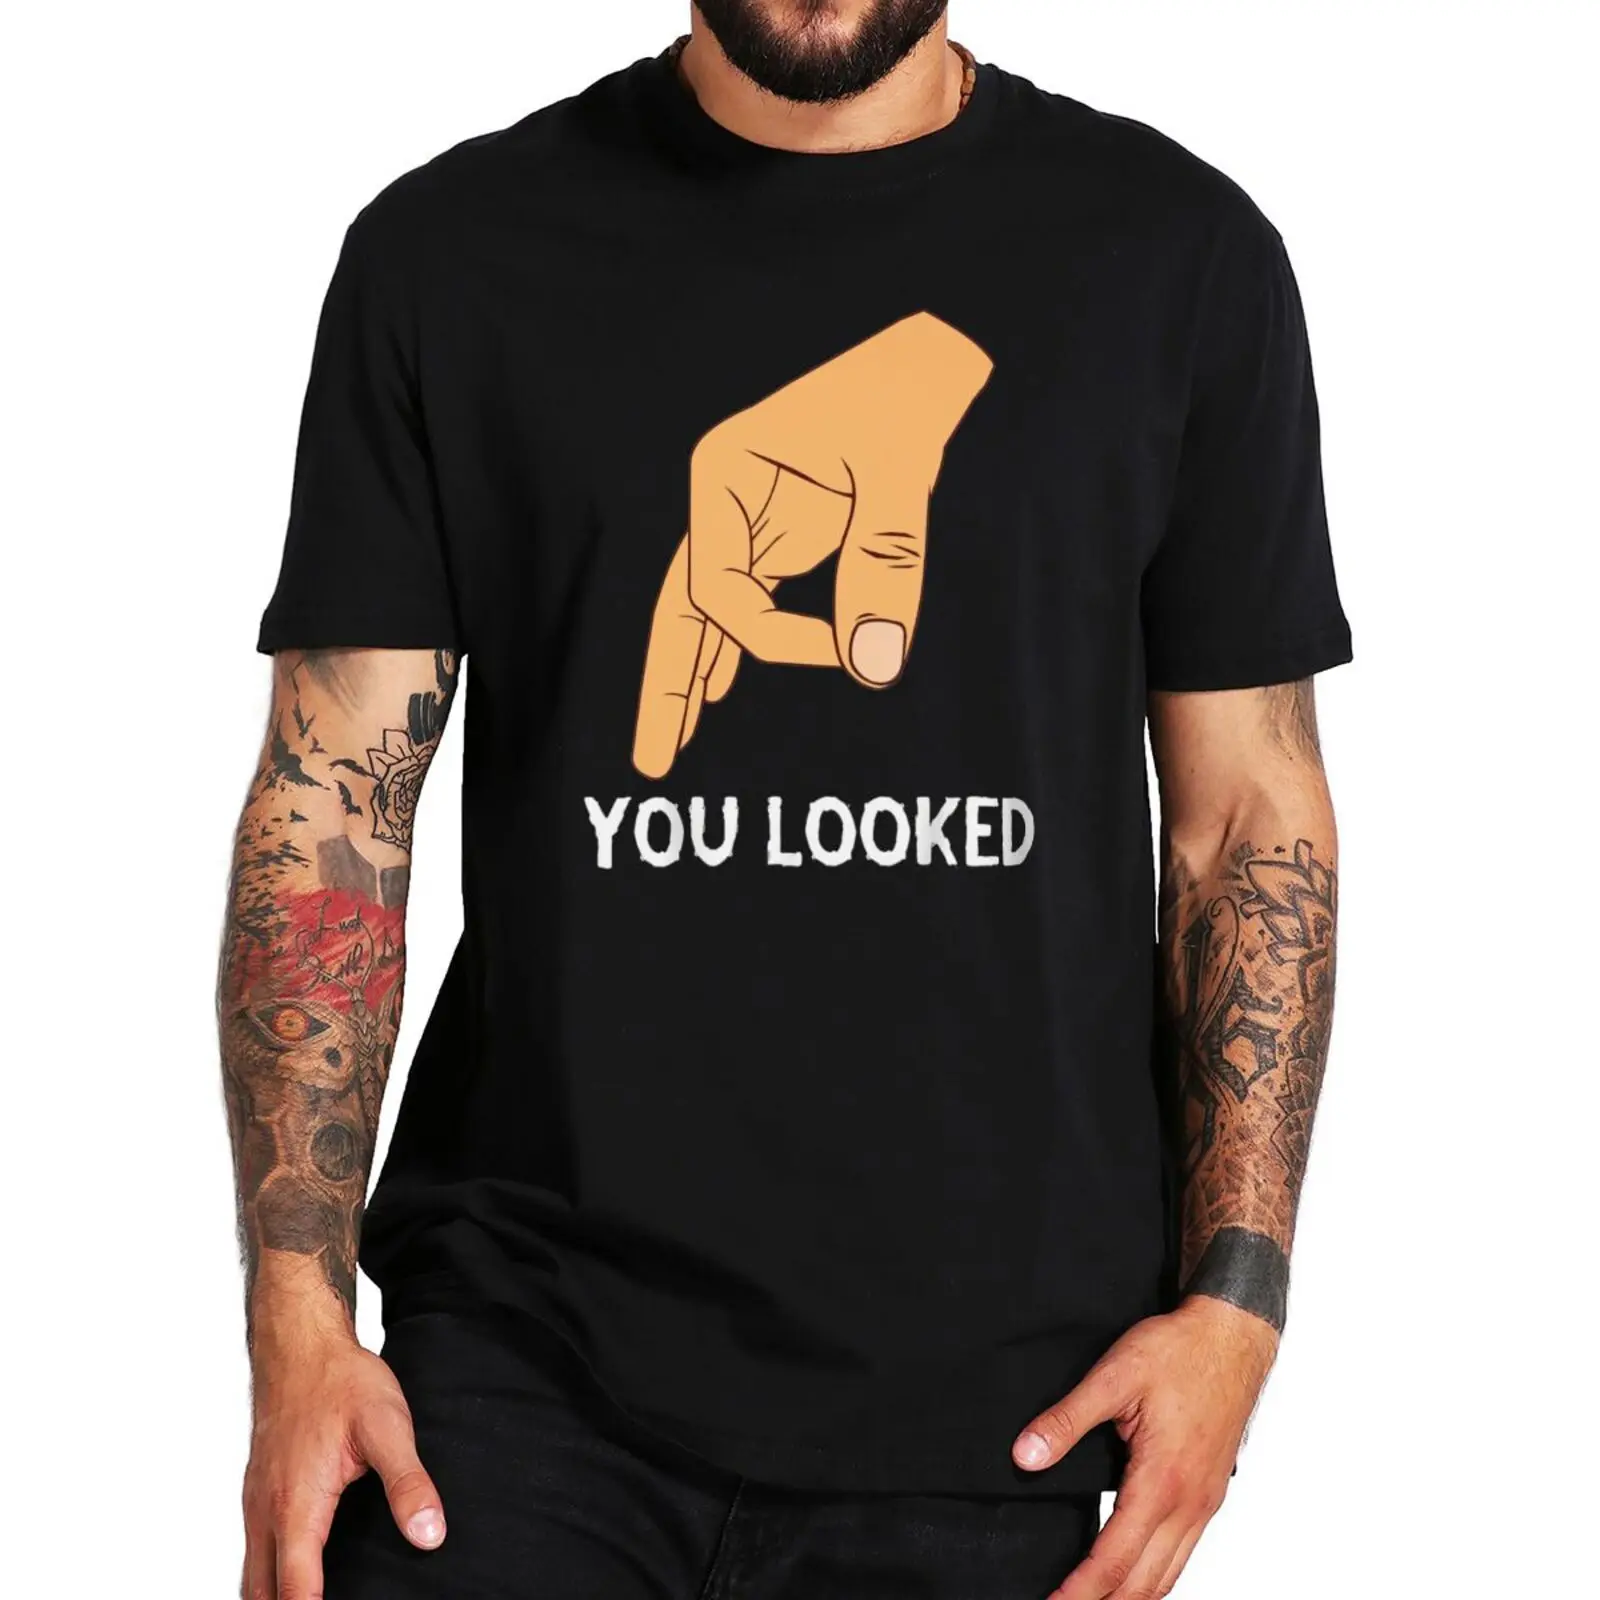 

You Looked Haha Circle Finger Hand Game T Shirt Funny Meme Classic Tshirts For Unisex 100% Cotton Oversize Camiseta